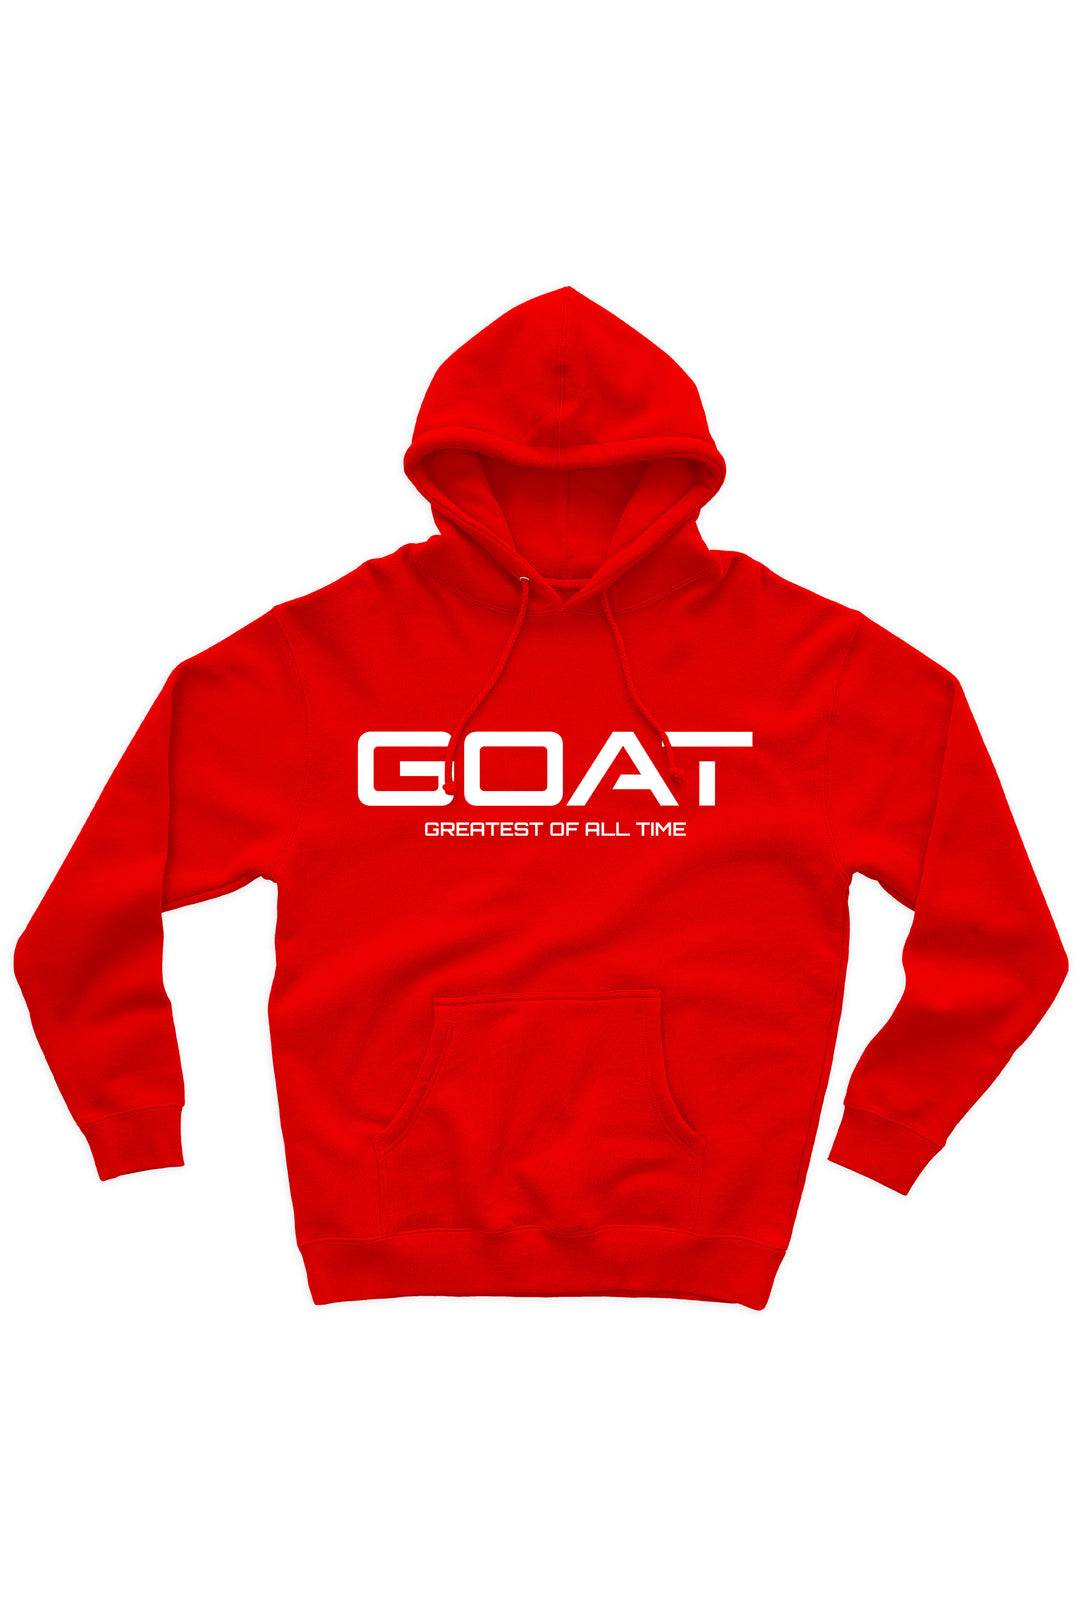 Greatest Of All Time Hoodie (White Logo) - Zamage